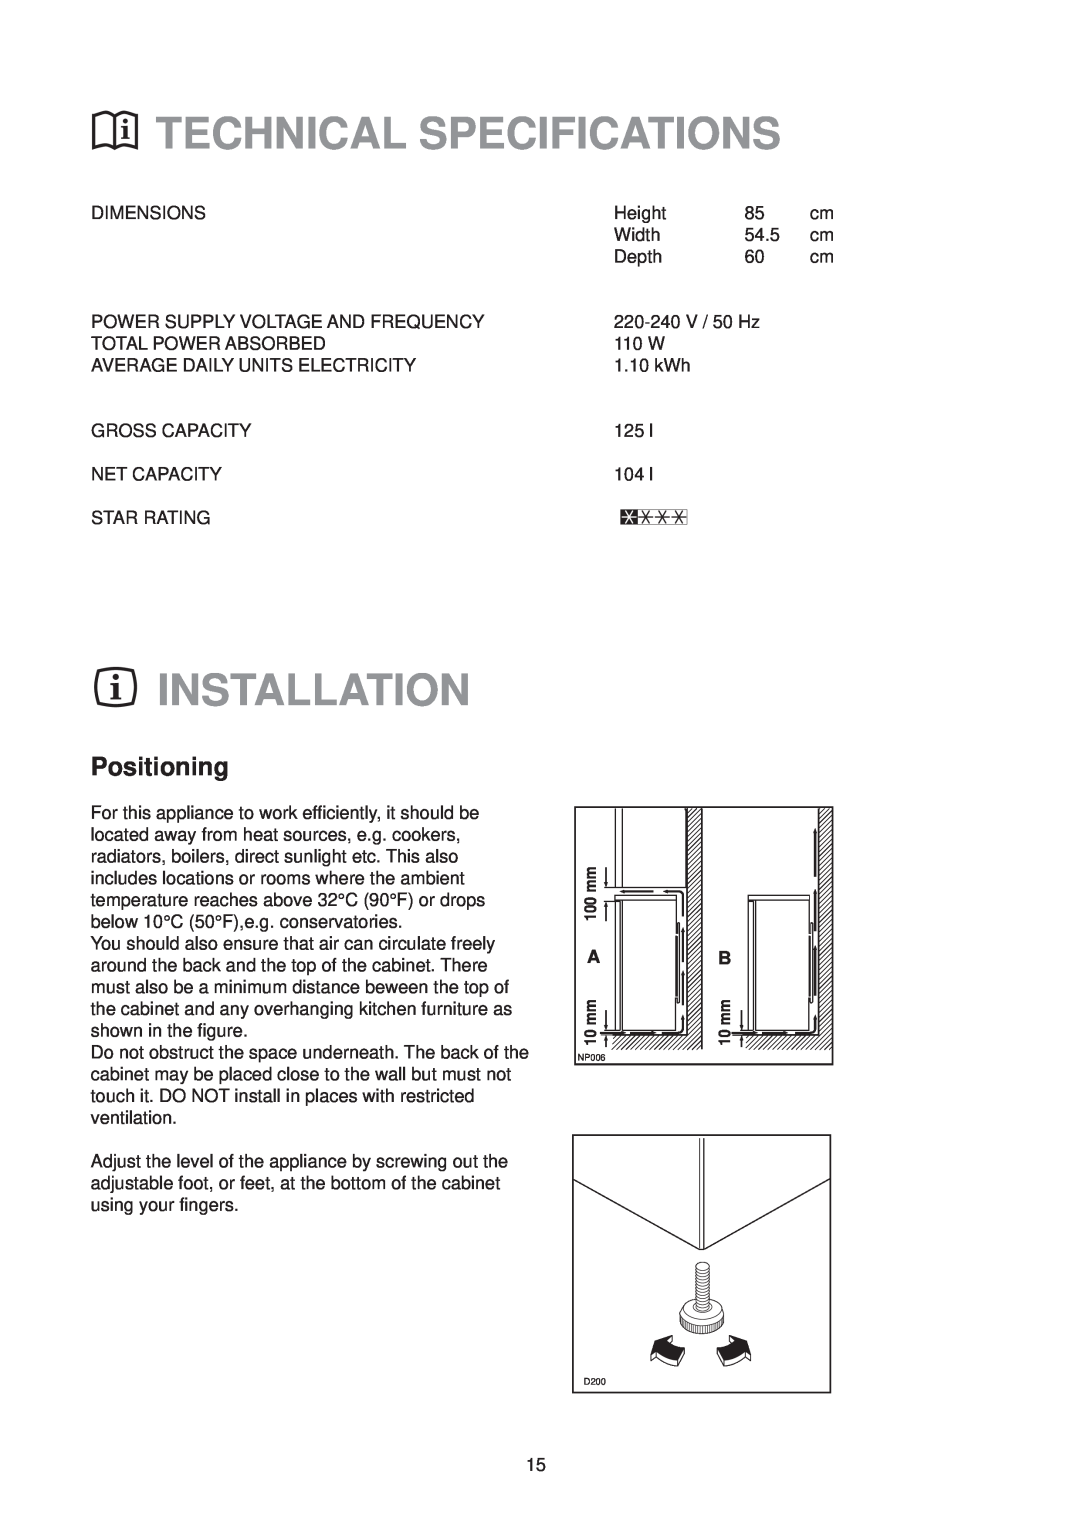 Electrolux EU 6321 manual Technical Specifications, Installation, Positioning 